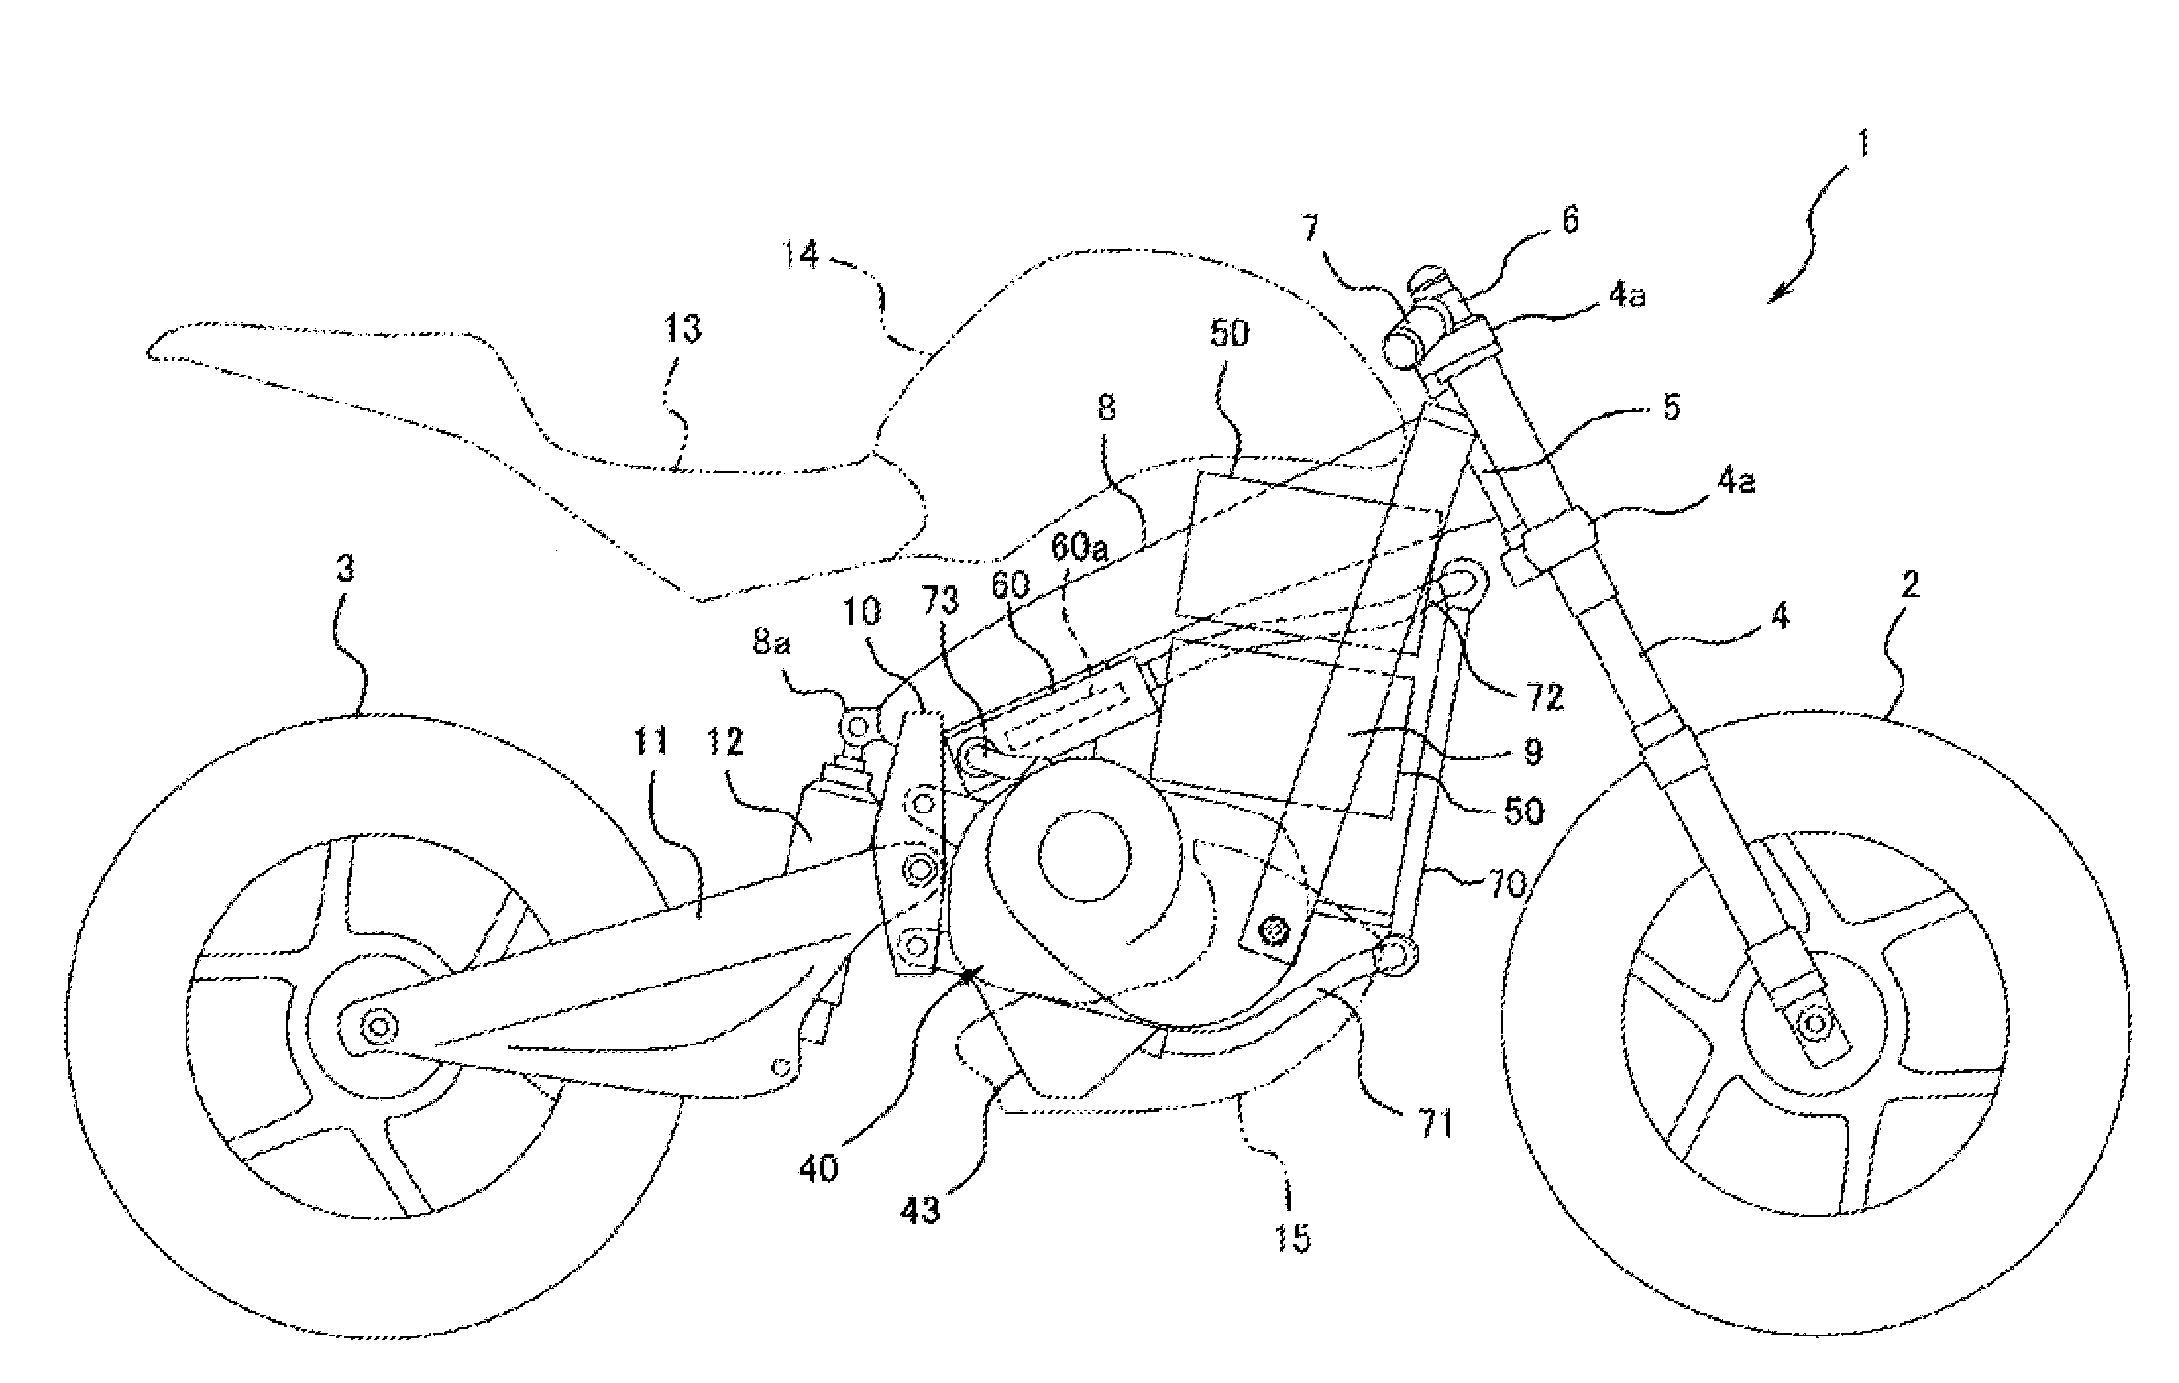 Cooling Structure for Cooling Electric Motor for Vehicle